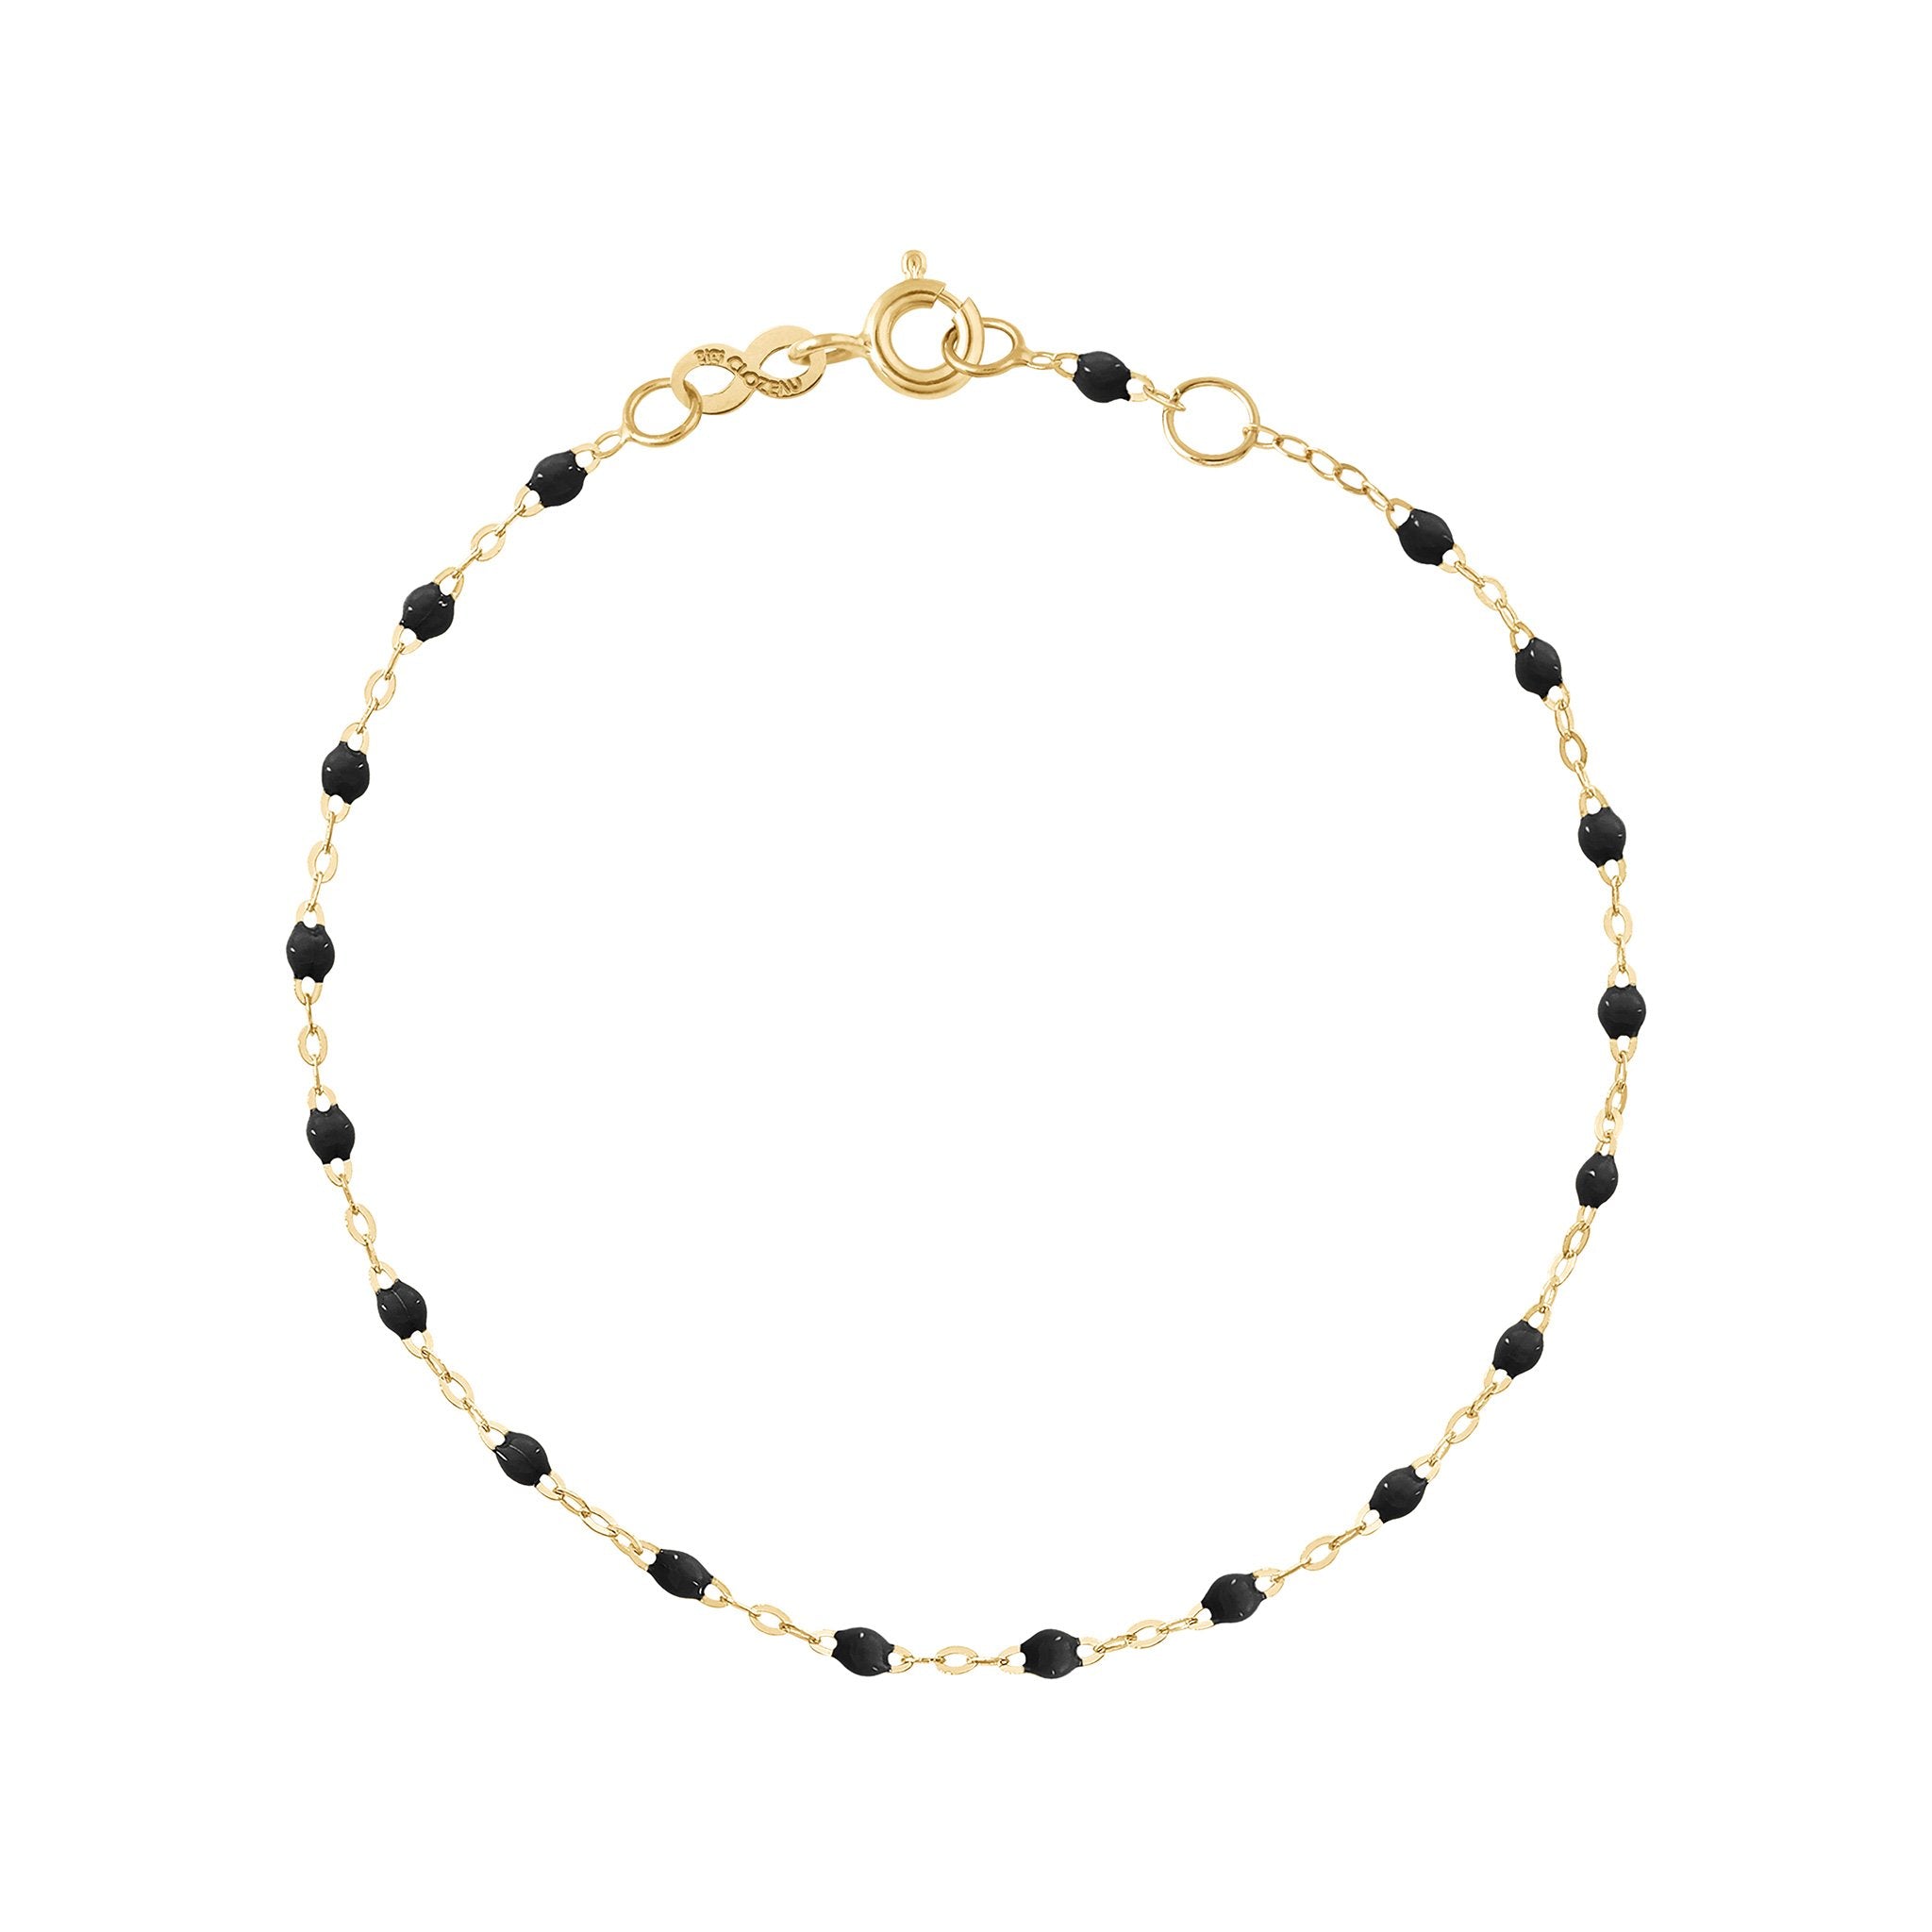 Gold Bracelet with Personalized Black Letter Beads – Sea Marie Designs